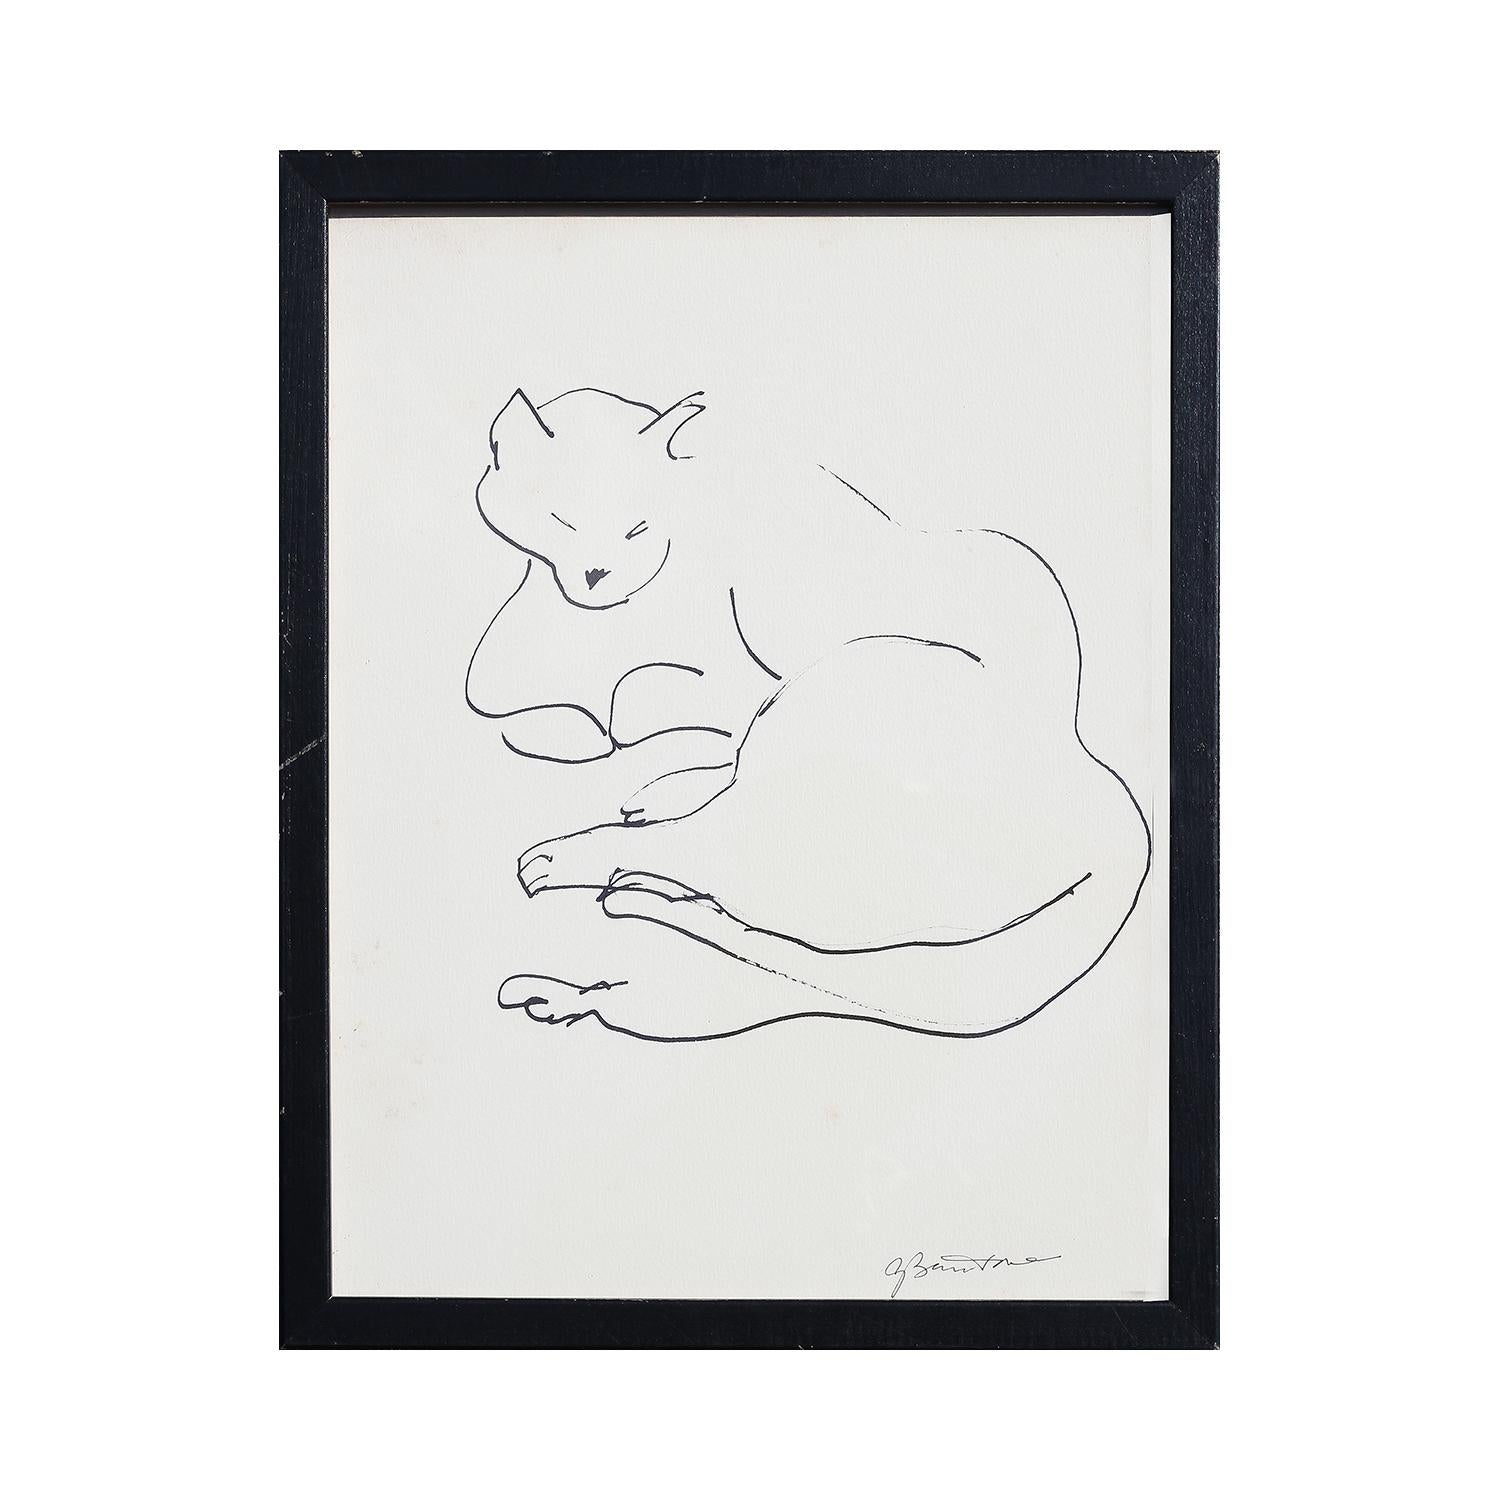 Modern Minimal Pen Contour Line Drawing of a Lounging Cat - Art by Gertrude Barnstone